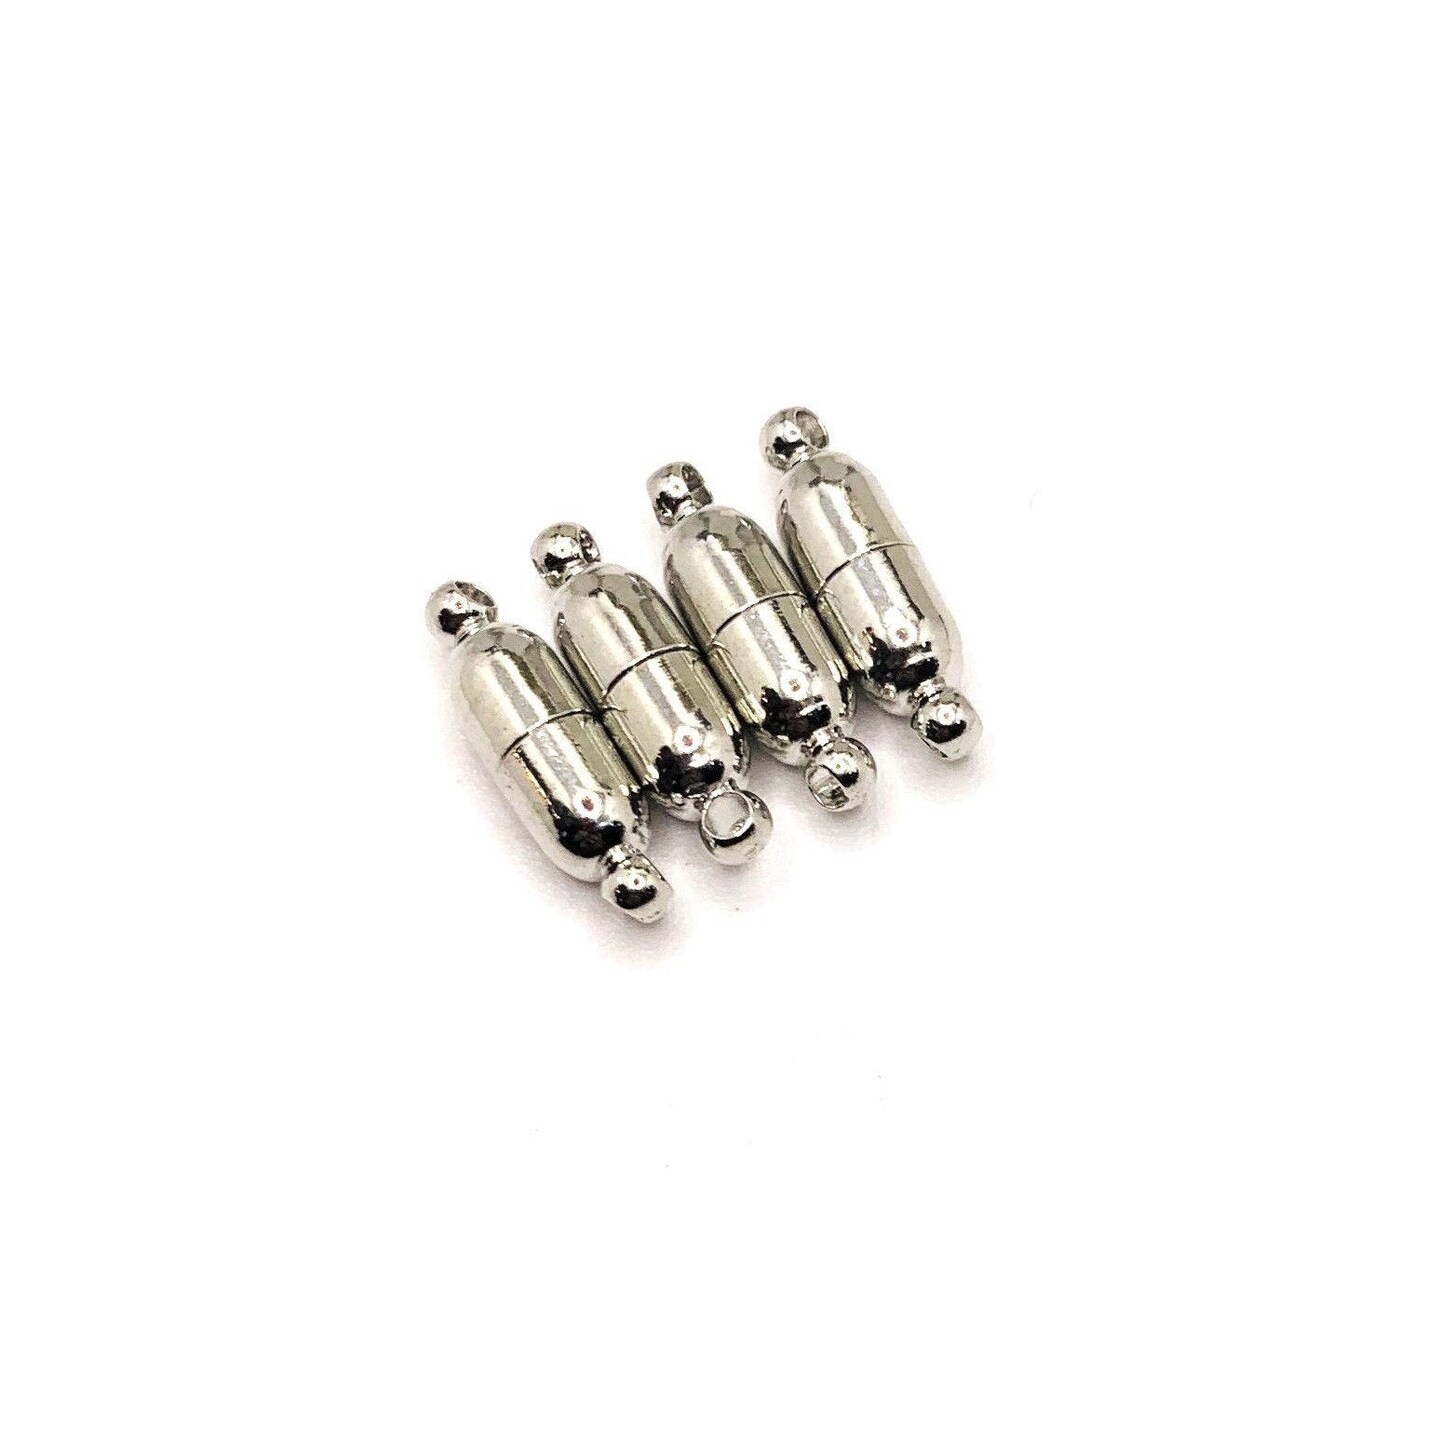 4, 20 or 50 Pieces: Magnetic Silver Bullet Jewelry Clasps